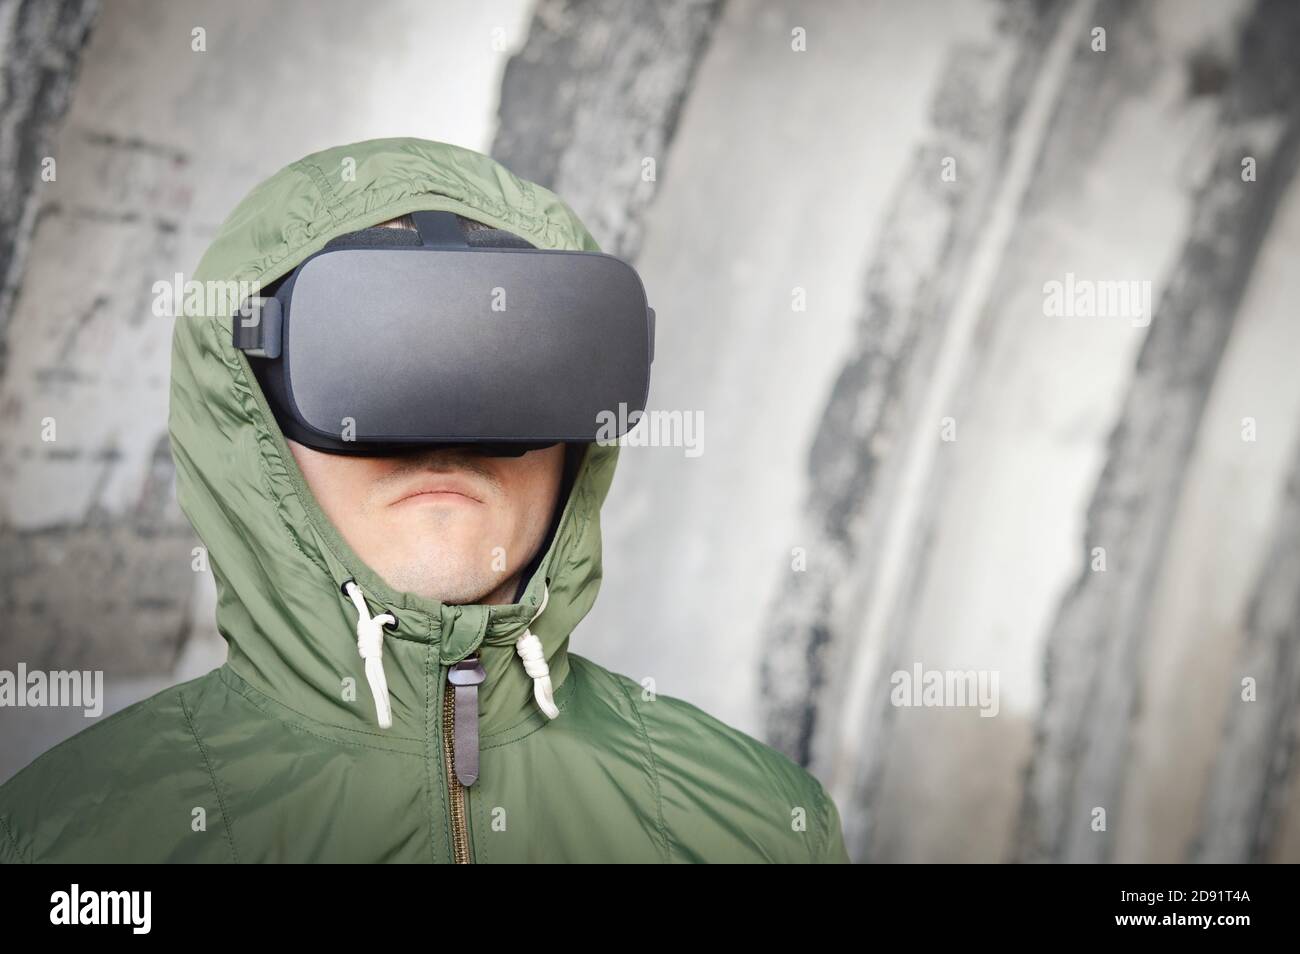 soldier of future with virtual reality headset and a green protective jacket, surveillance, monitoring and military operation Stock Photo